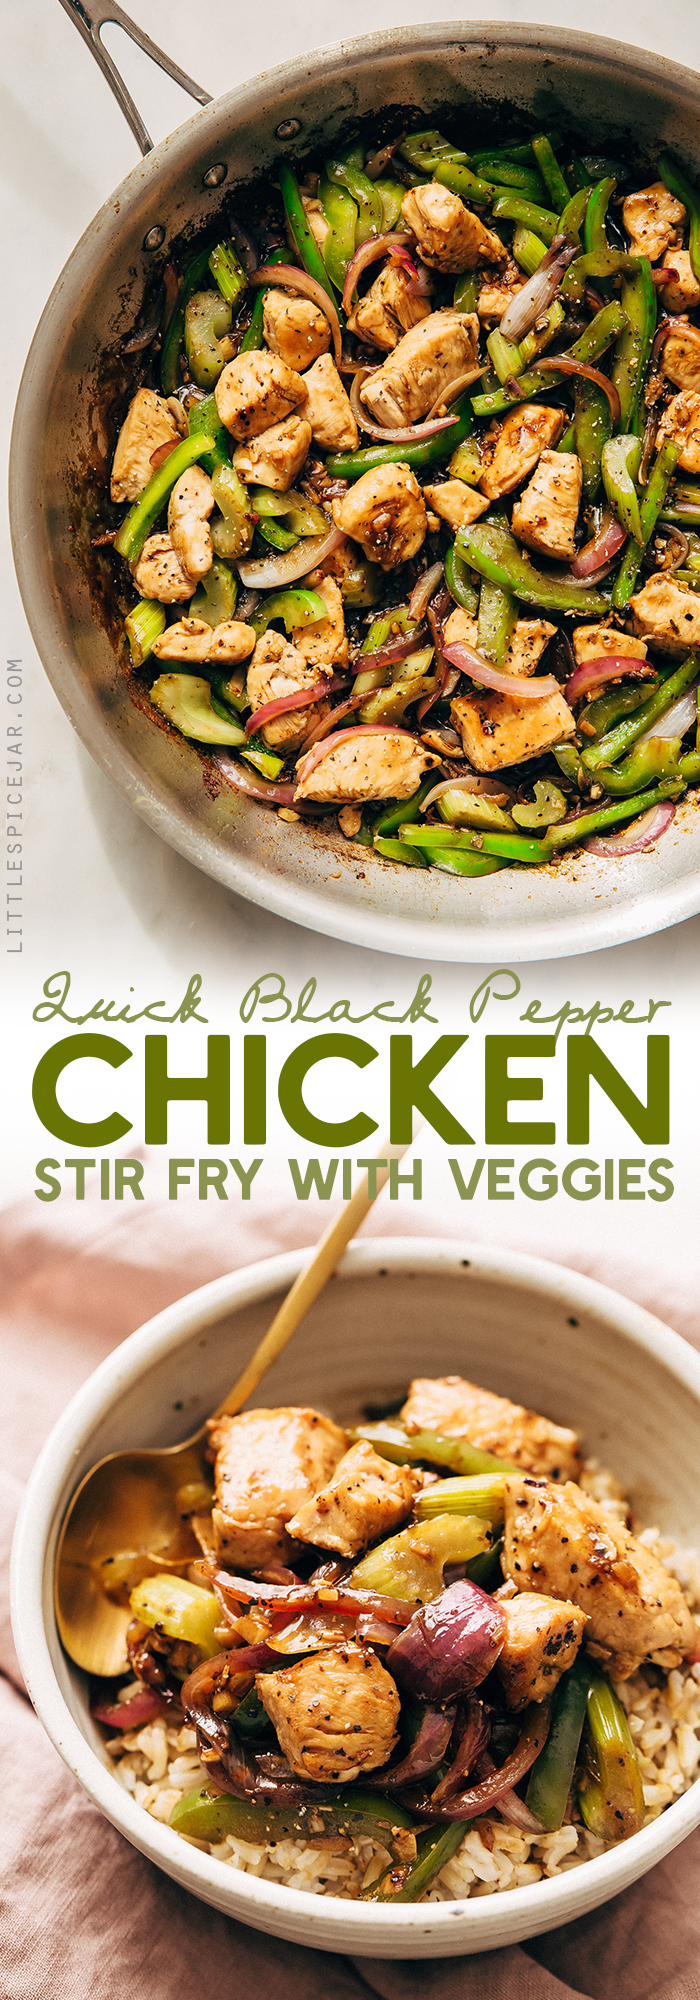 Black Pepper Chicken Stir Fry - Learn how to make a simple chicken stir fry with veggies all under 25 minutes and it's perfect for MEAL PREPPING! #blackpepperchicken #chickenstirfry #chickenandveggiestirfry #stirfry | Littlespicejar.com